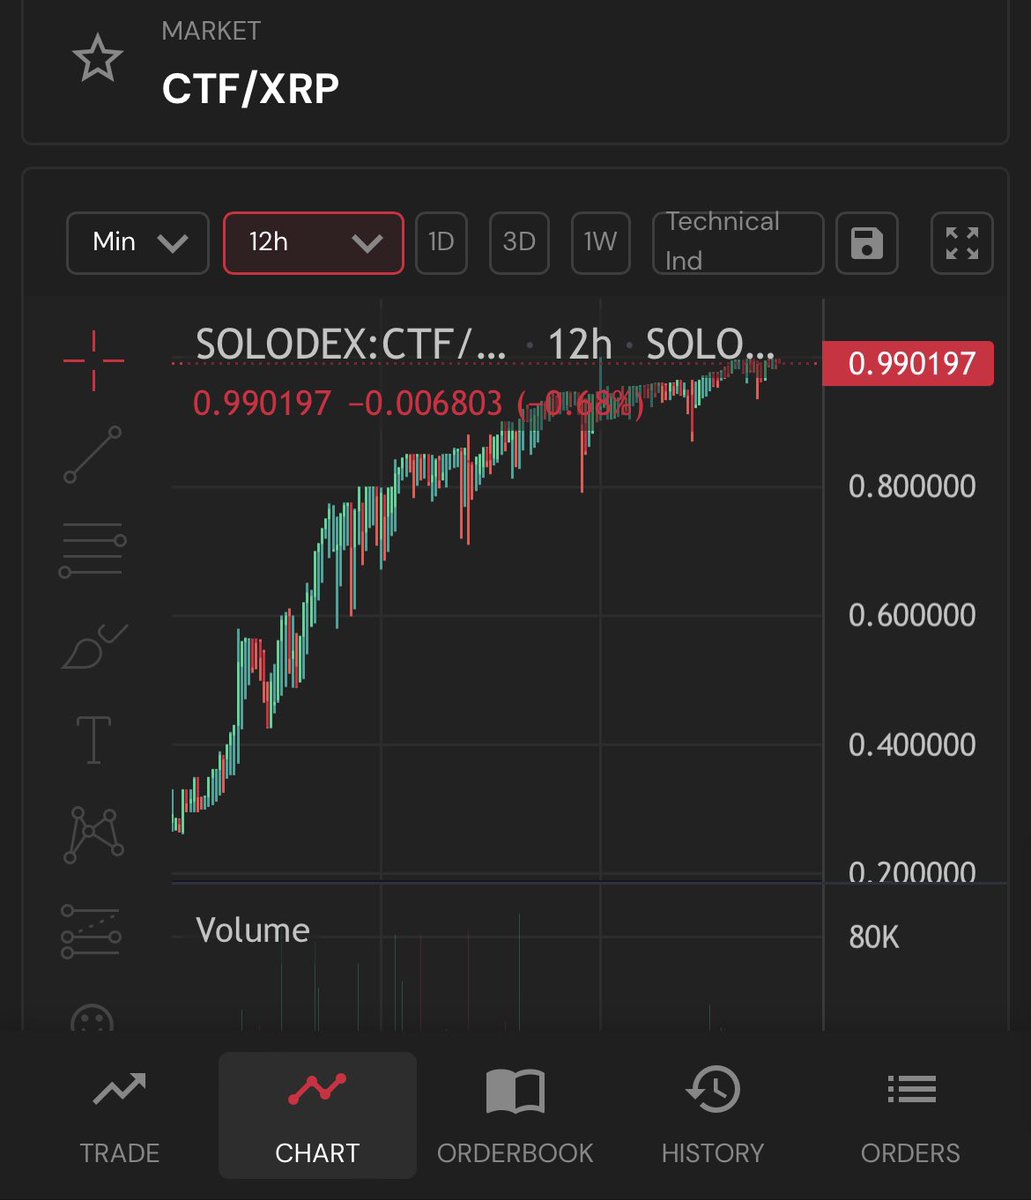 CTF IS ON THE WAY TO NEW HIGHS! 📈

It’s the top DeFi token on the #XRPL ‼️

CTF token could be looking at a jump from 0.99XRP to 374.25XRP per token with a market cap of only $10 billion dollars! Now imagine the kind of money that will flow onto XRPL after that ETF!

We could be